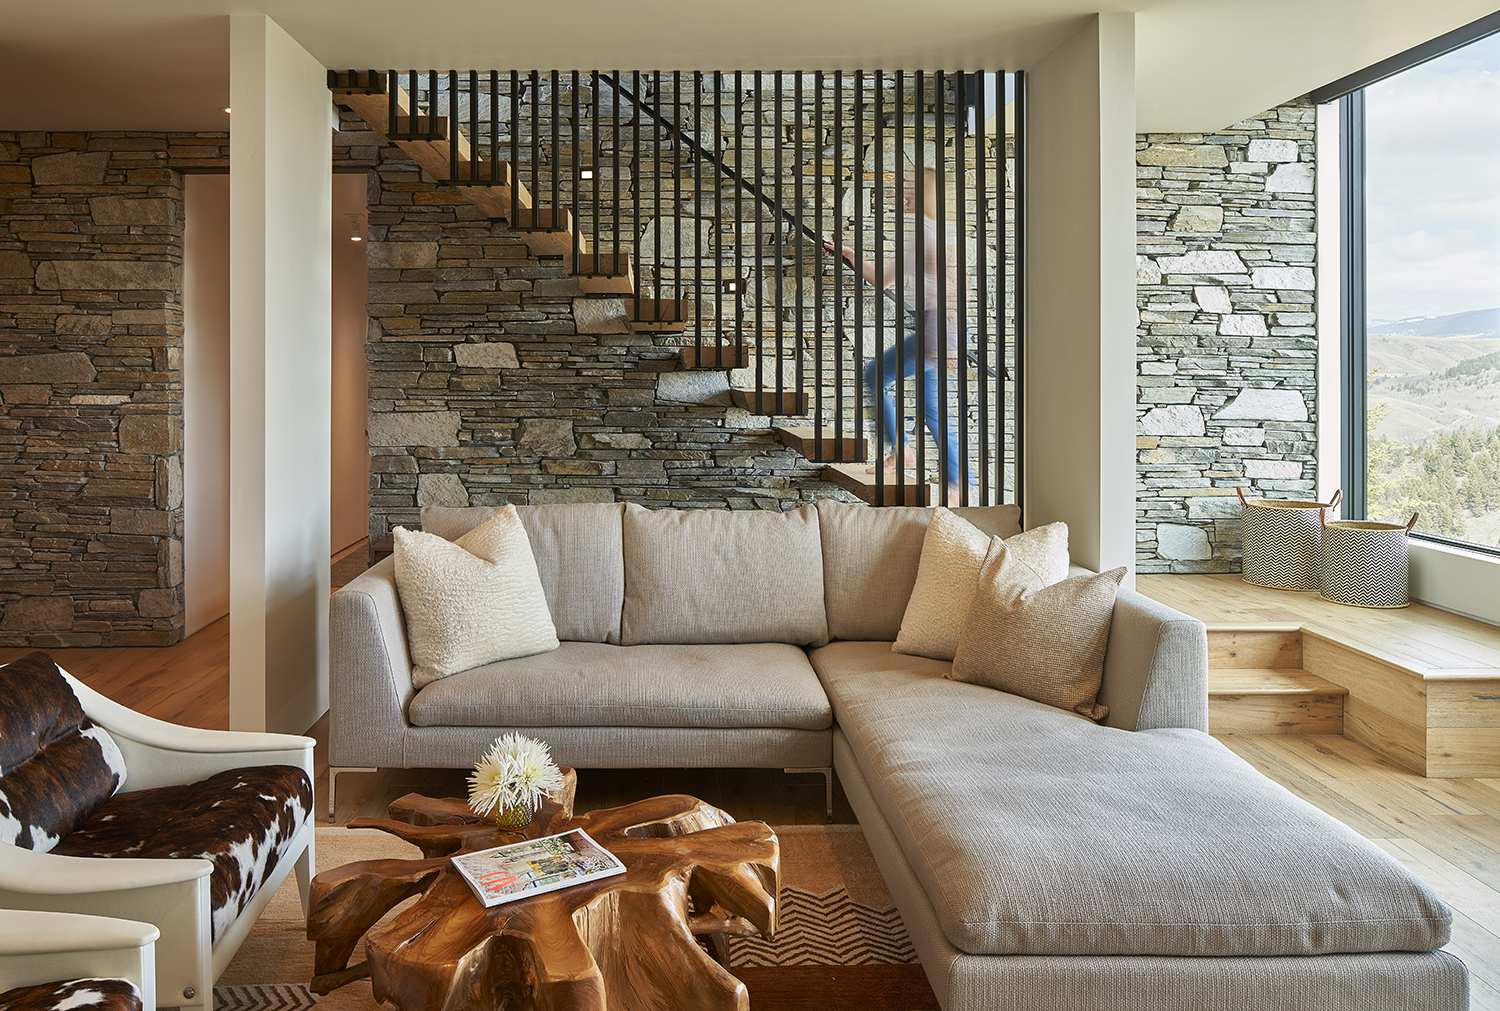 Interior view of the family room and stairwell at Gros Ventre West, a custom home designed and built by Farmer Payne Architects.